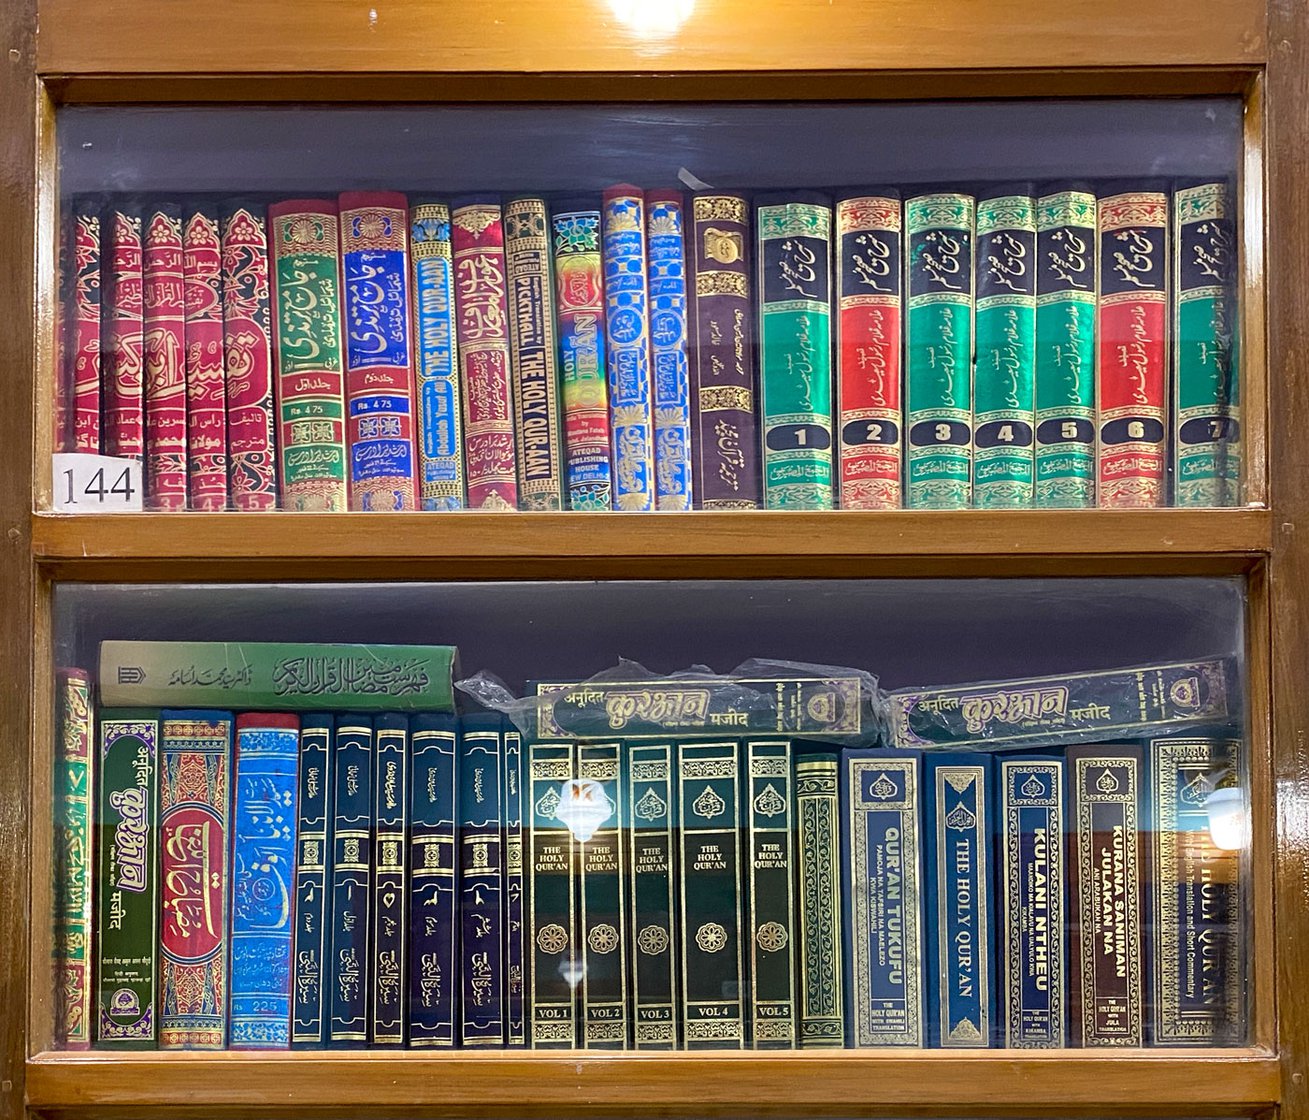 Copies of the Quran and other books written Hindi, Urdu and English